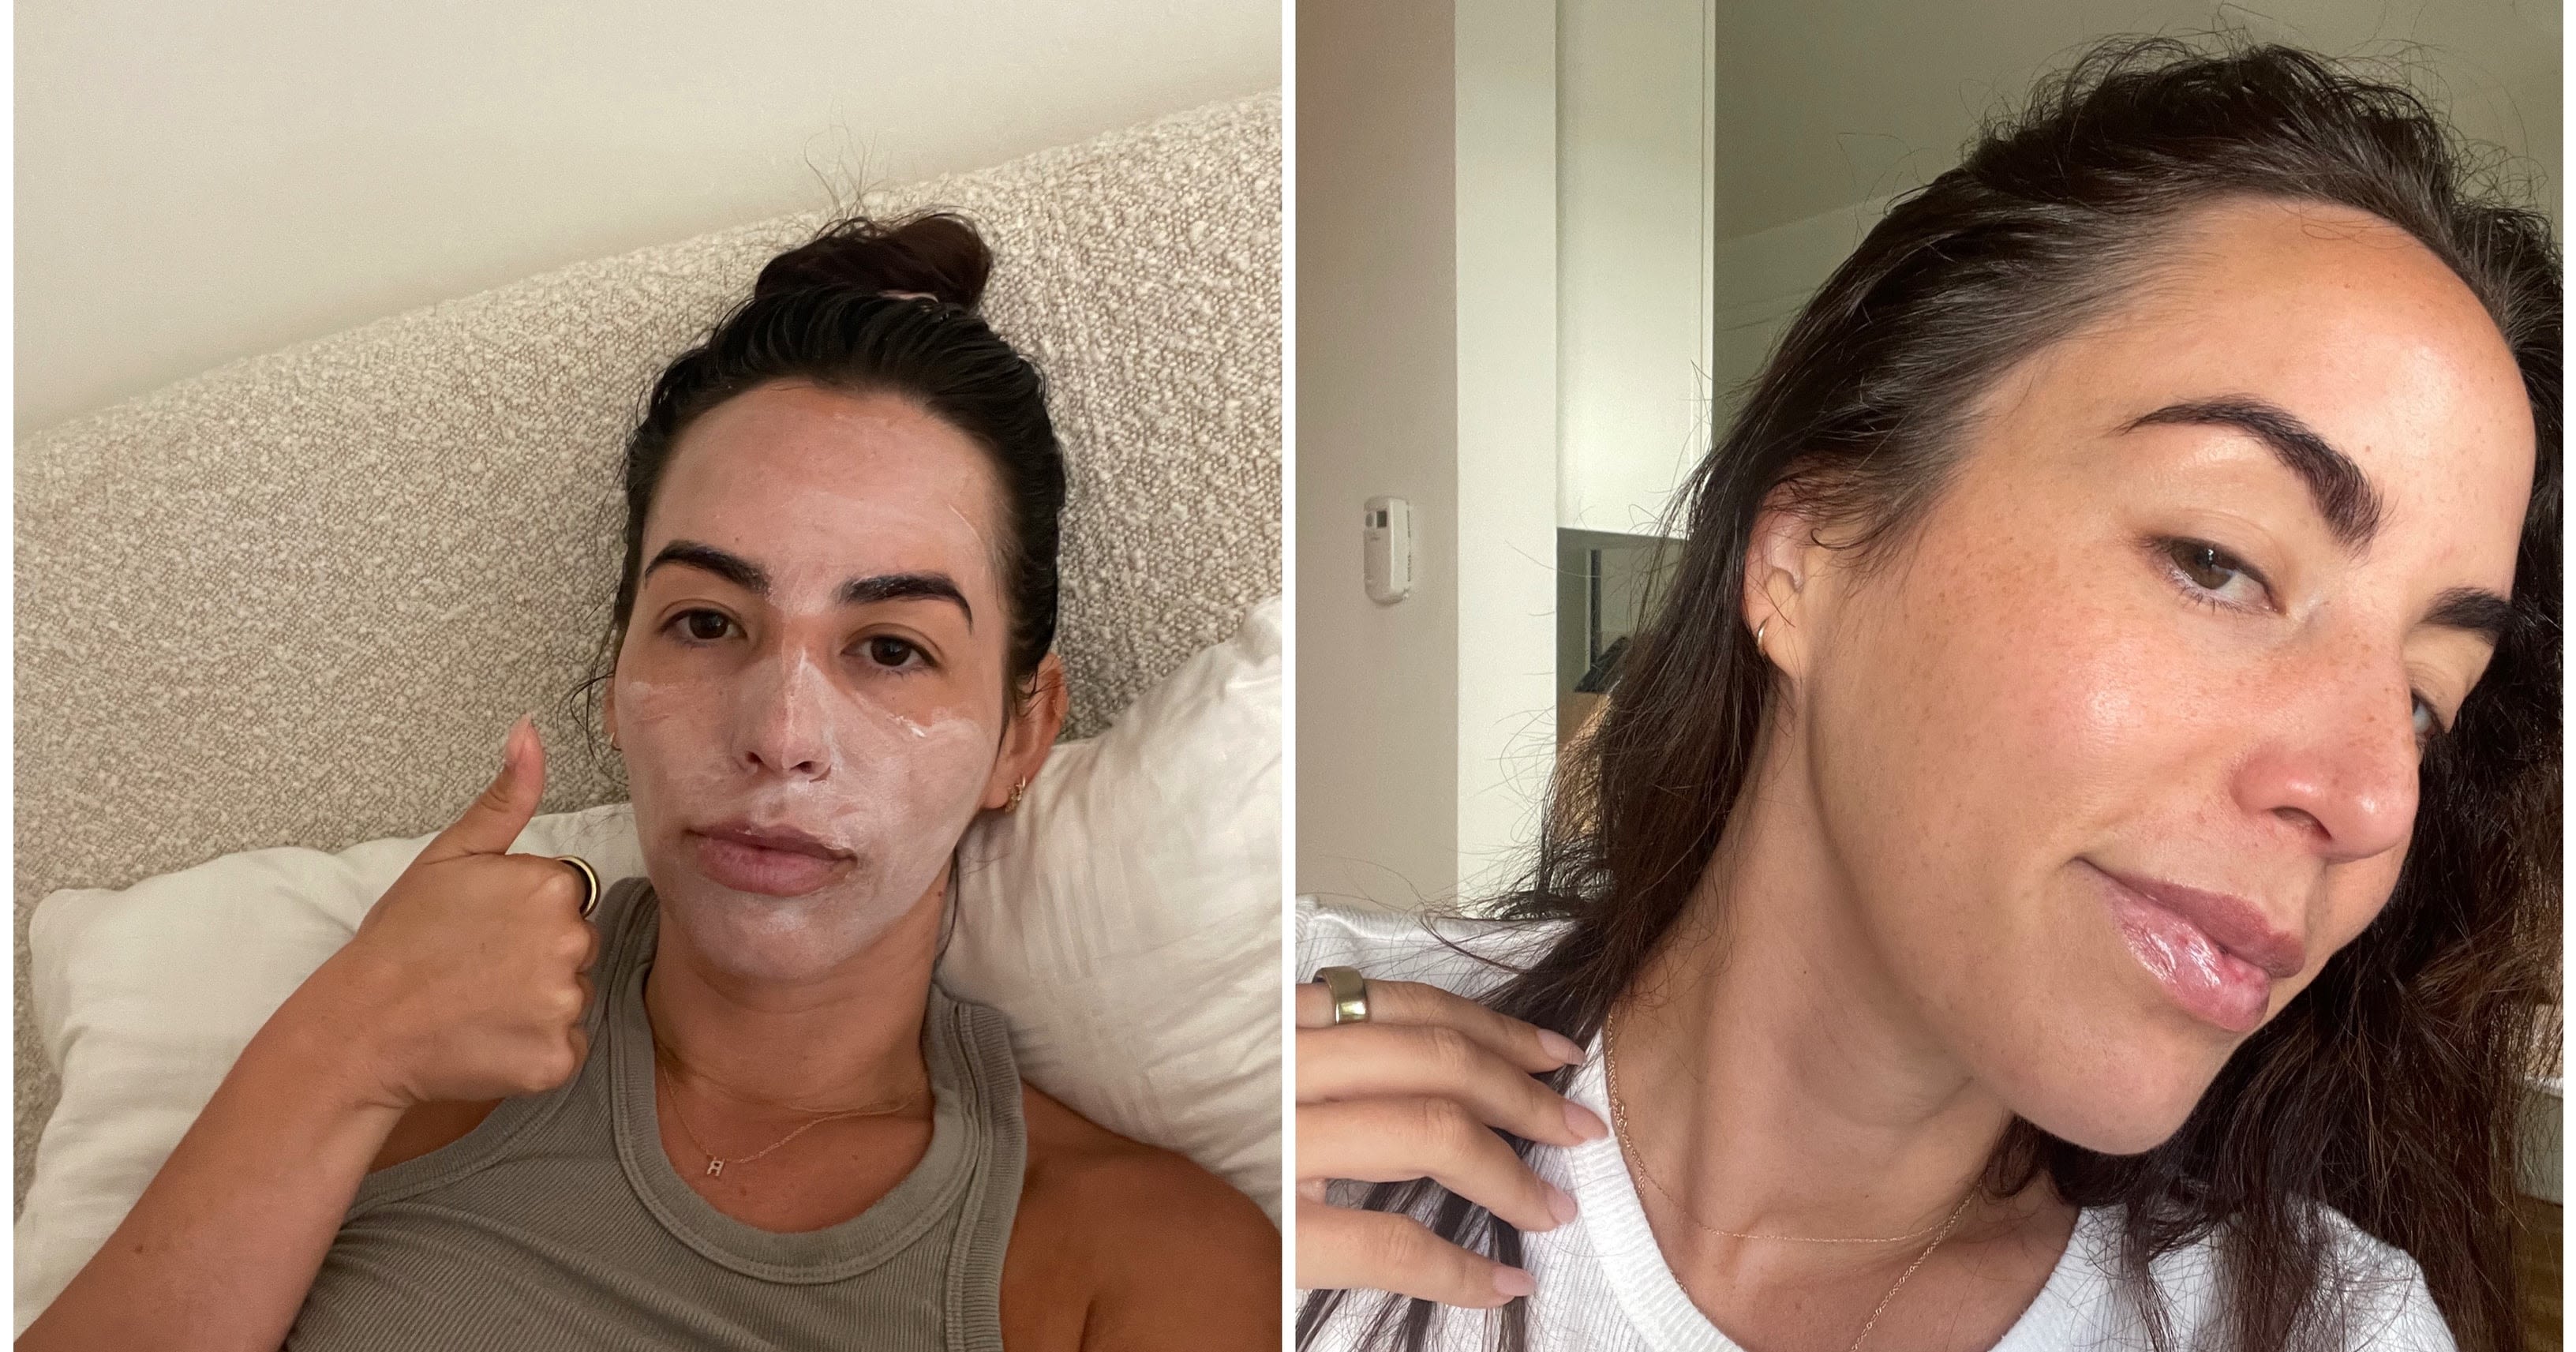 I Have Sensitive Skin, and "Face Basting" Was a Game-Changer